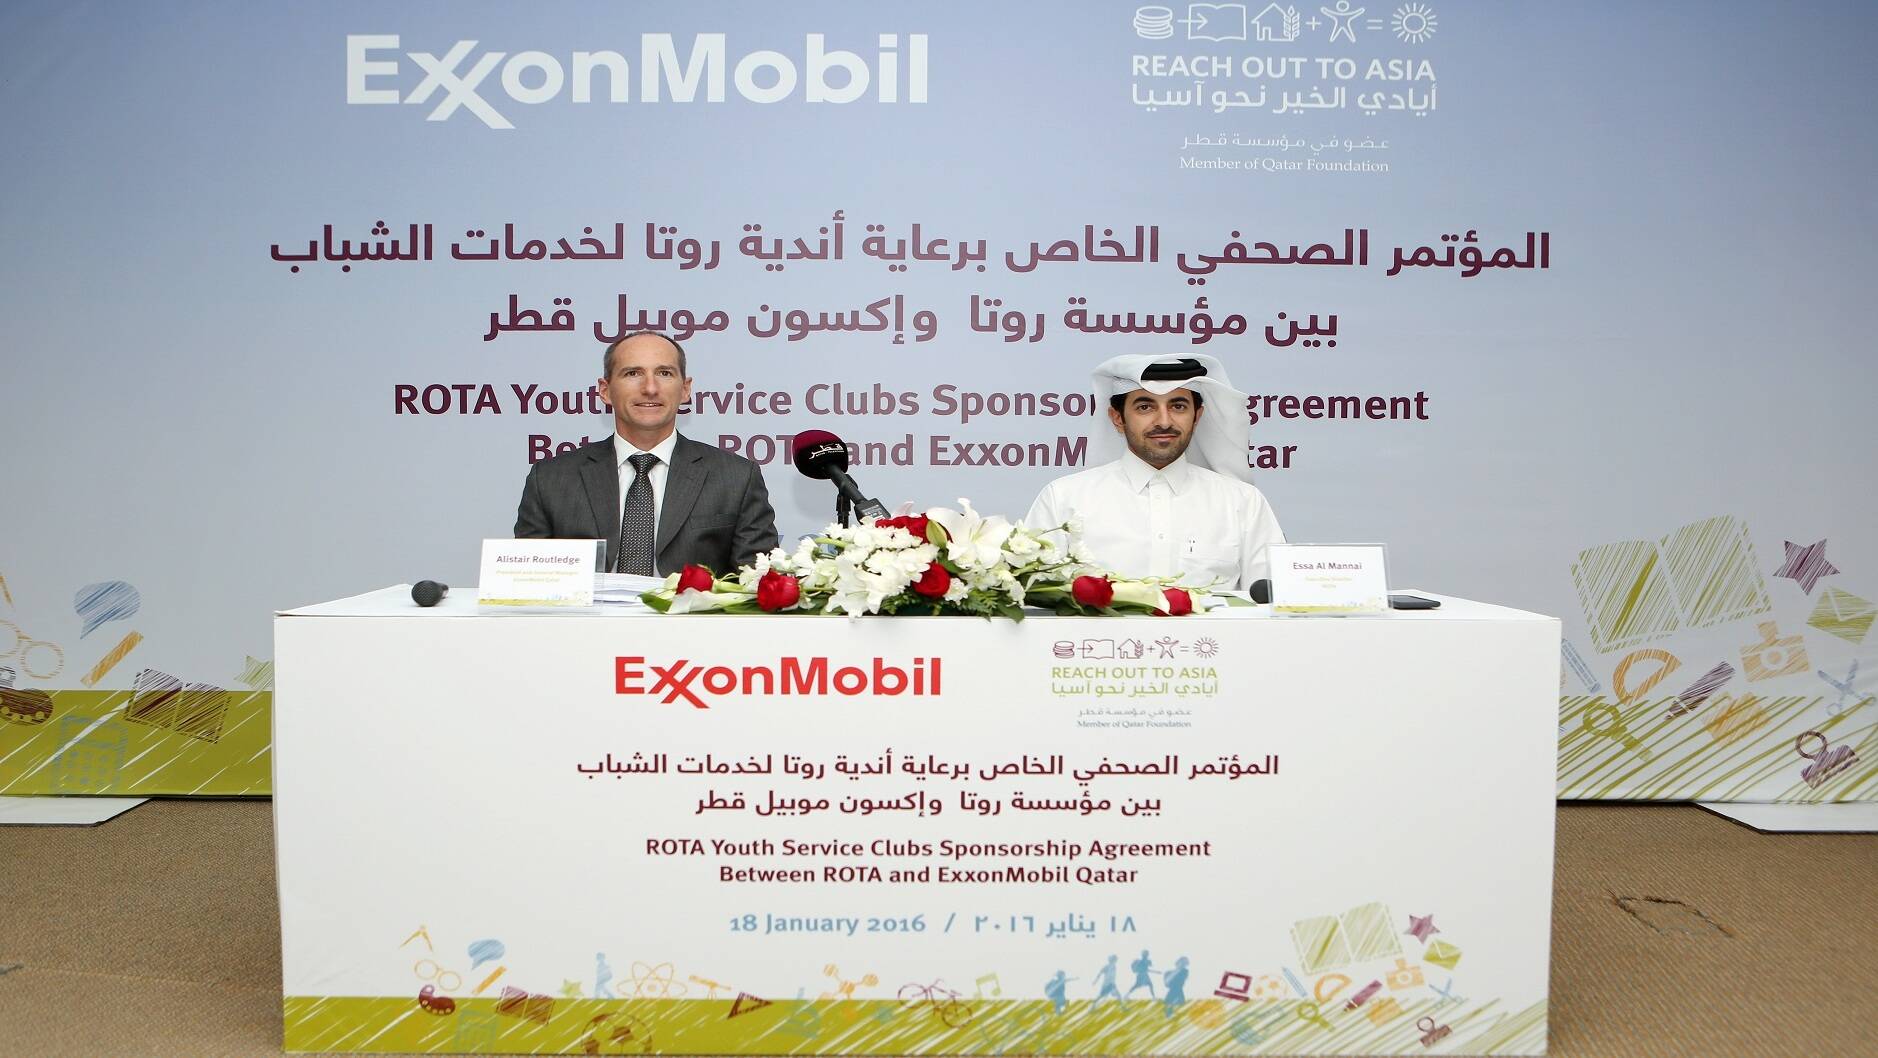 Alistair Routledge, President and General Manager for ExxonMobil Qatar, and Essa Al Mannai, Executive Director of ROTA, during a press conference following the Rota Youth Service Clubs sponsorship agreement signing.